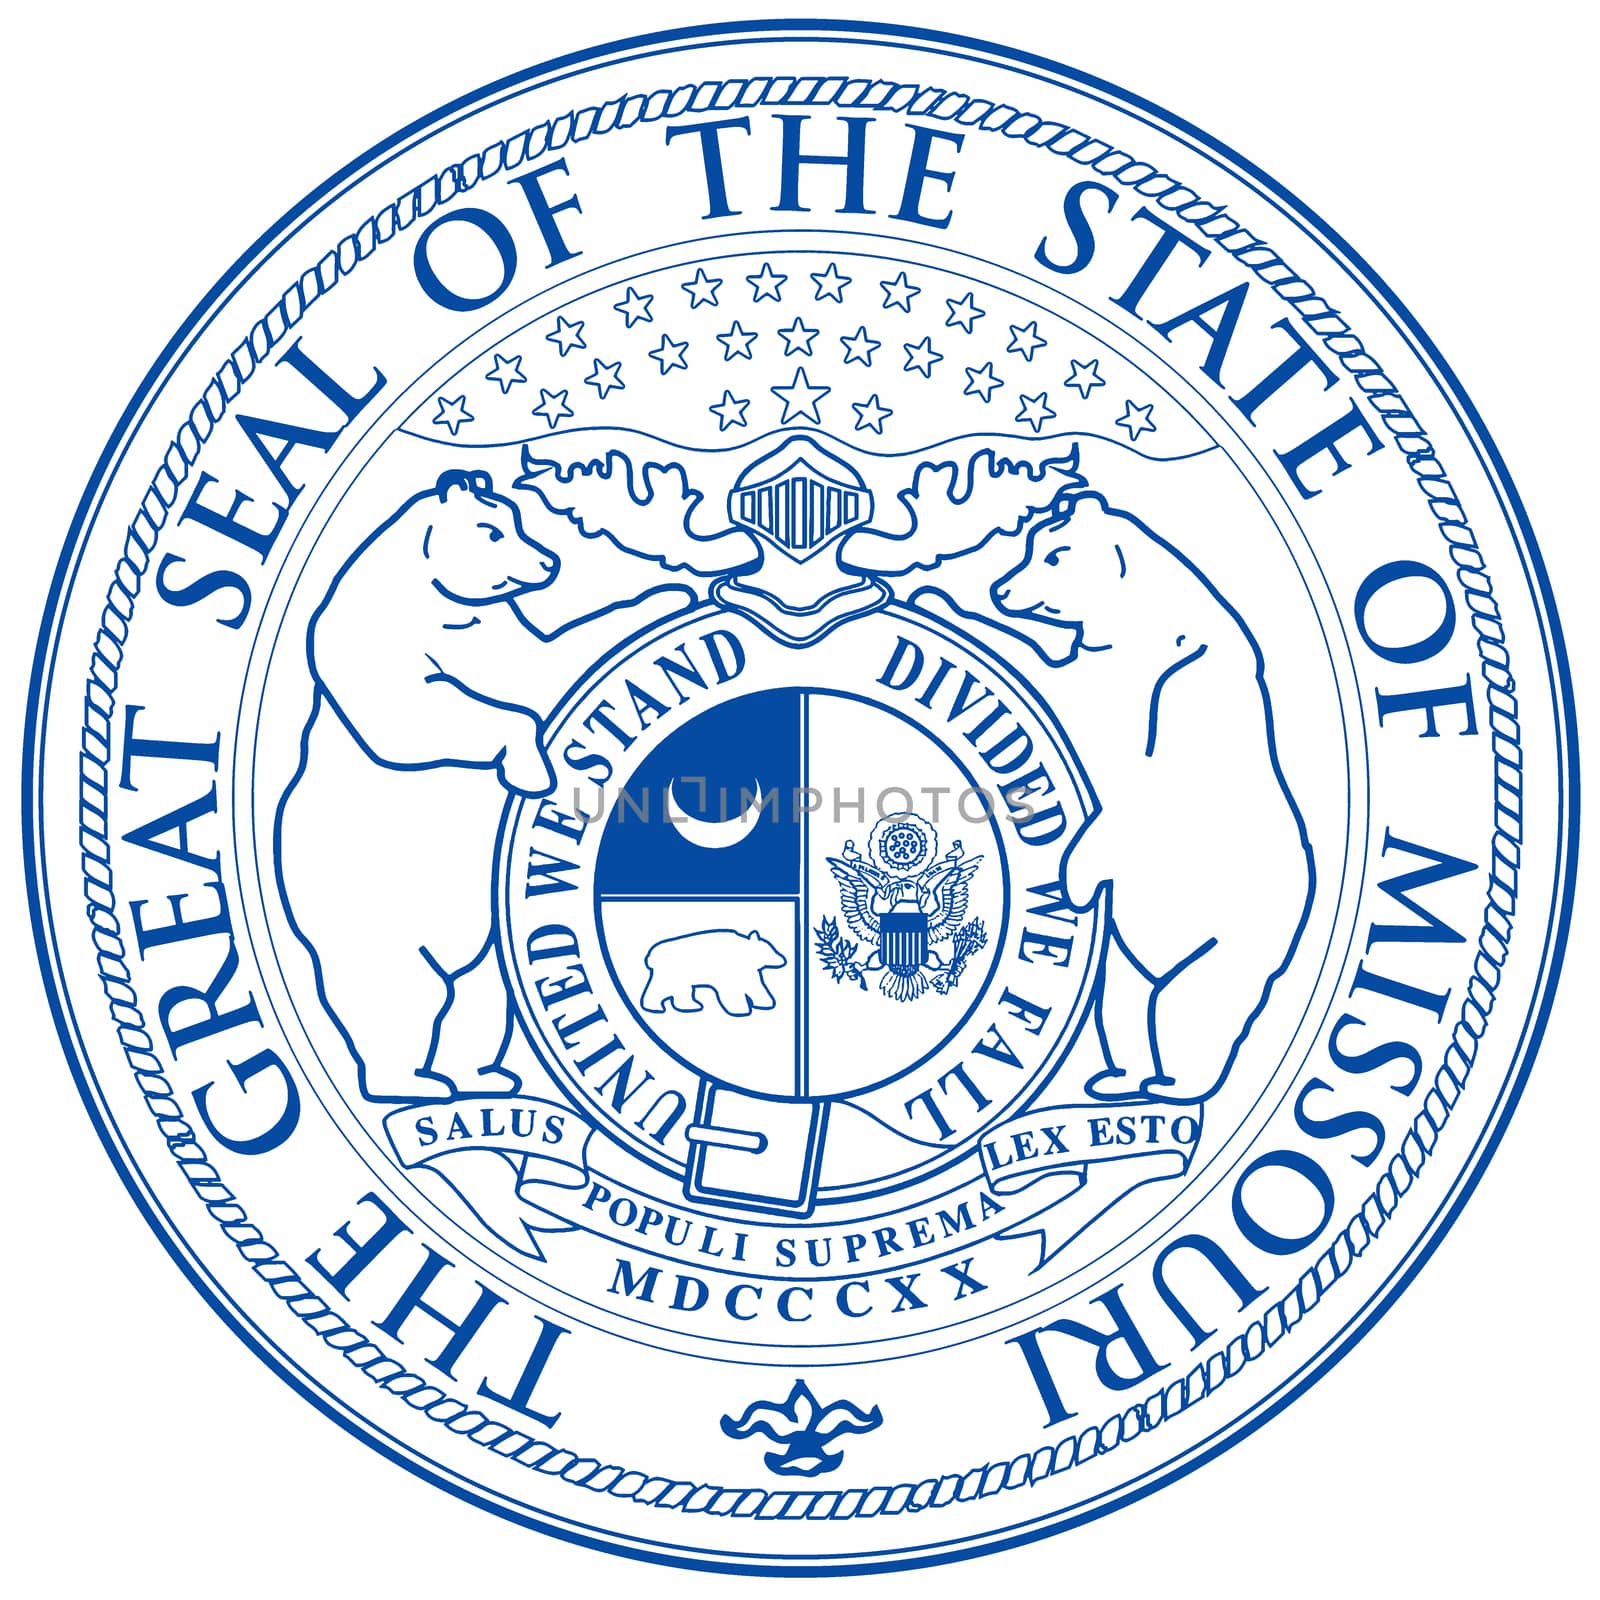 The great seal of the state of Missouri